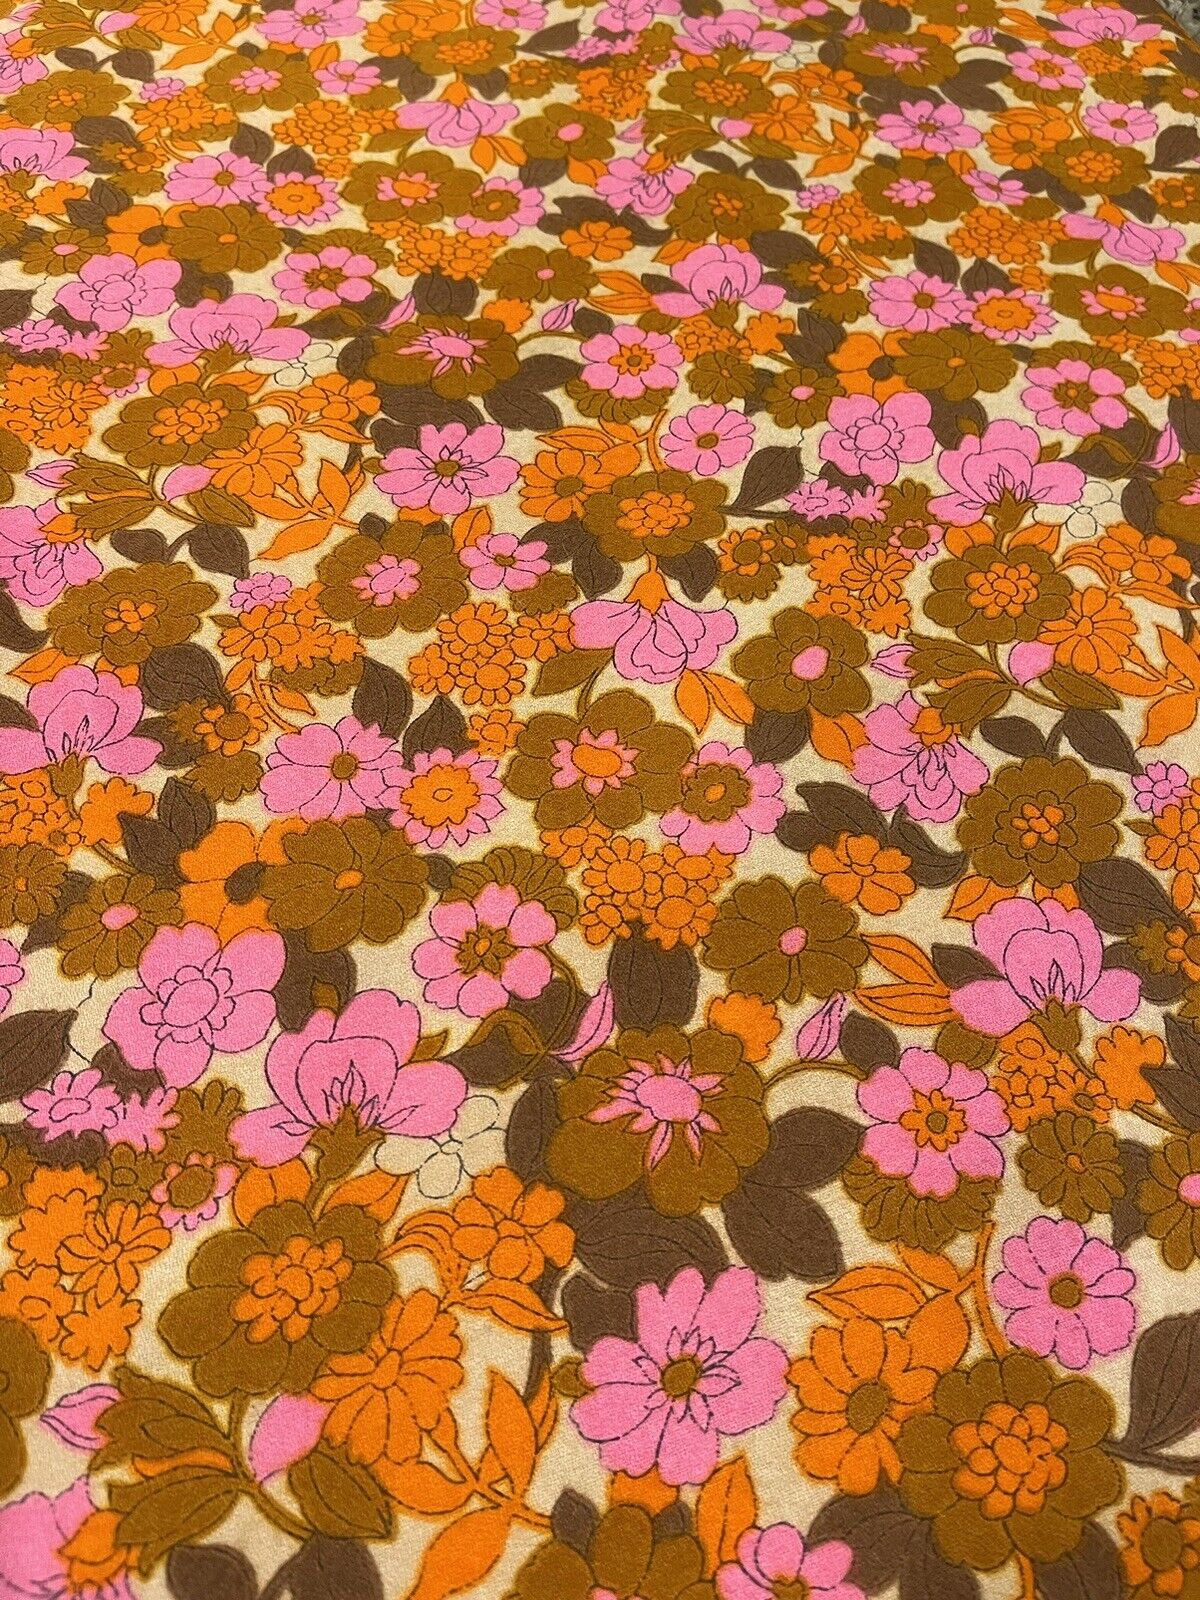 60s FLOWER POWER FABRIC 2.4 Y Retro Print Vintage MID CENTURY Psychedelic Floral